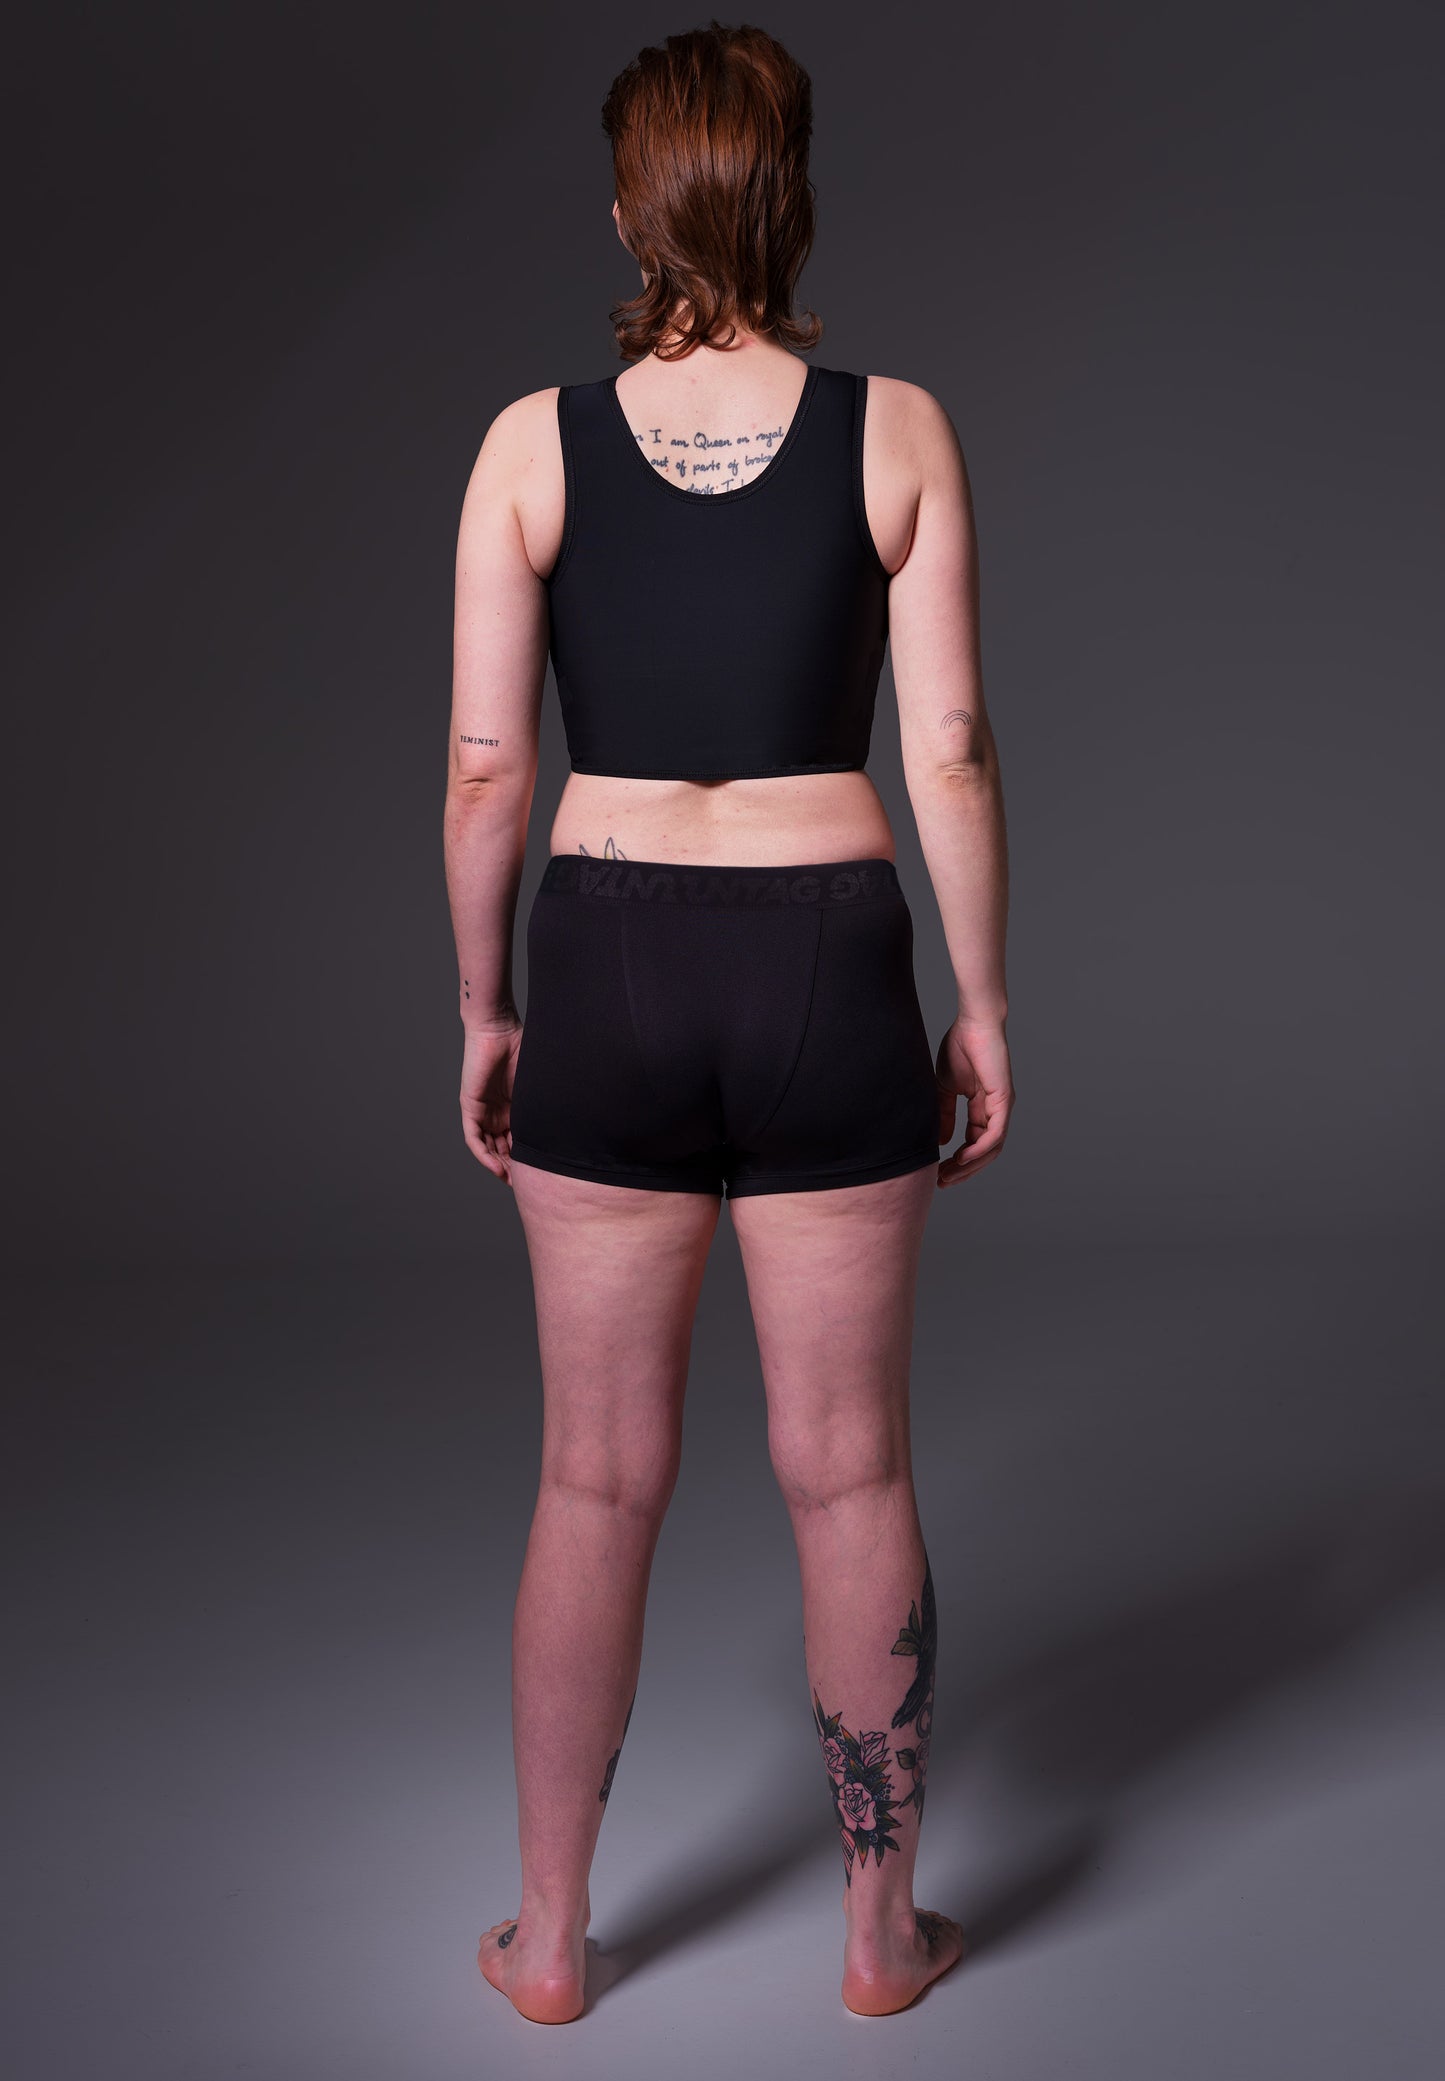 Back view of the Boxershorts in black, worn by model Lene